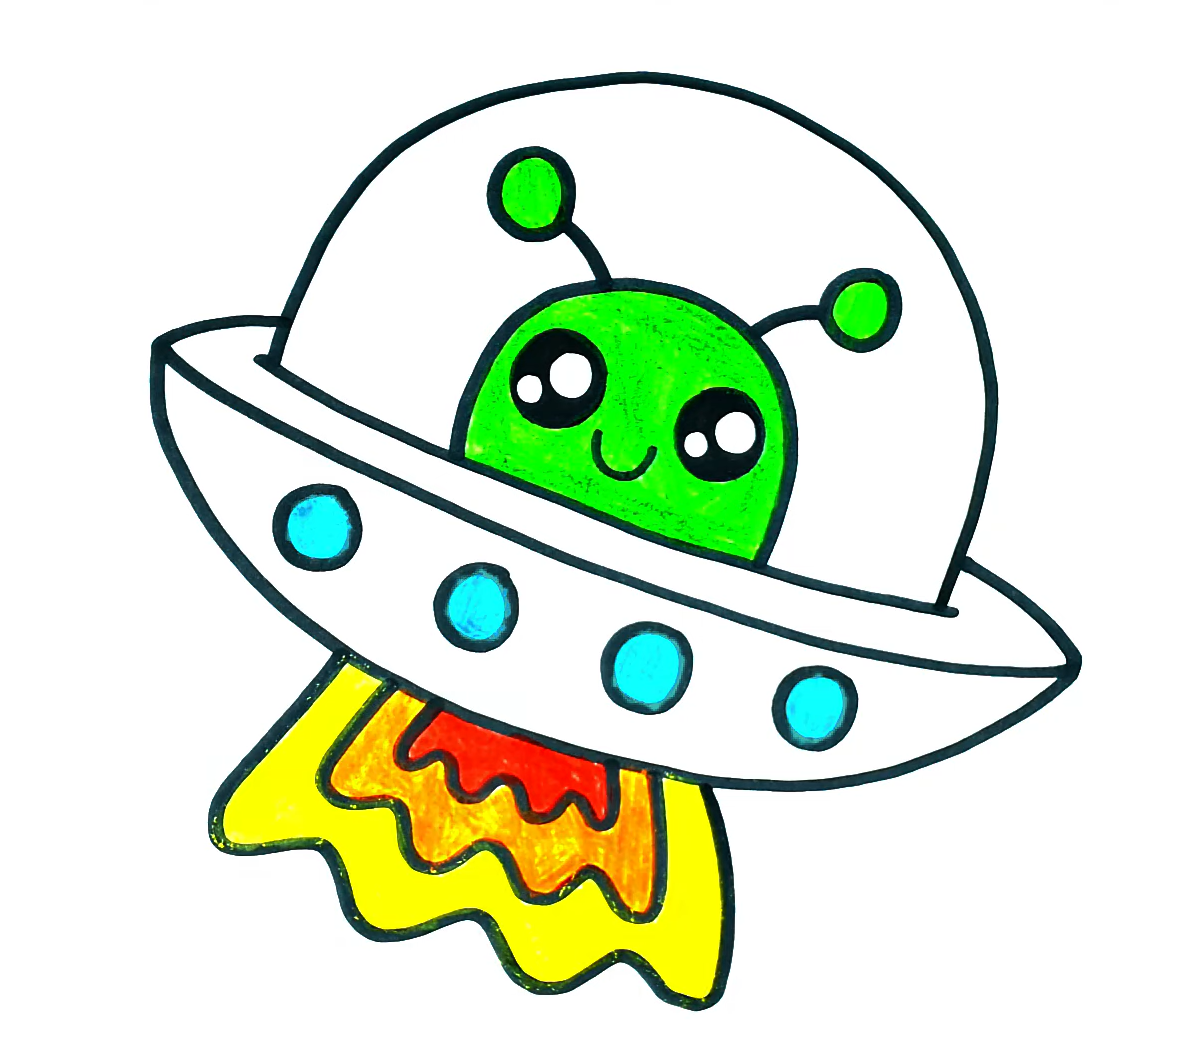 How To Draw a Cute Alien UFO Step-By-Step Tutorial